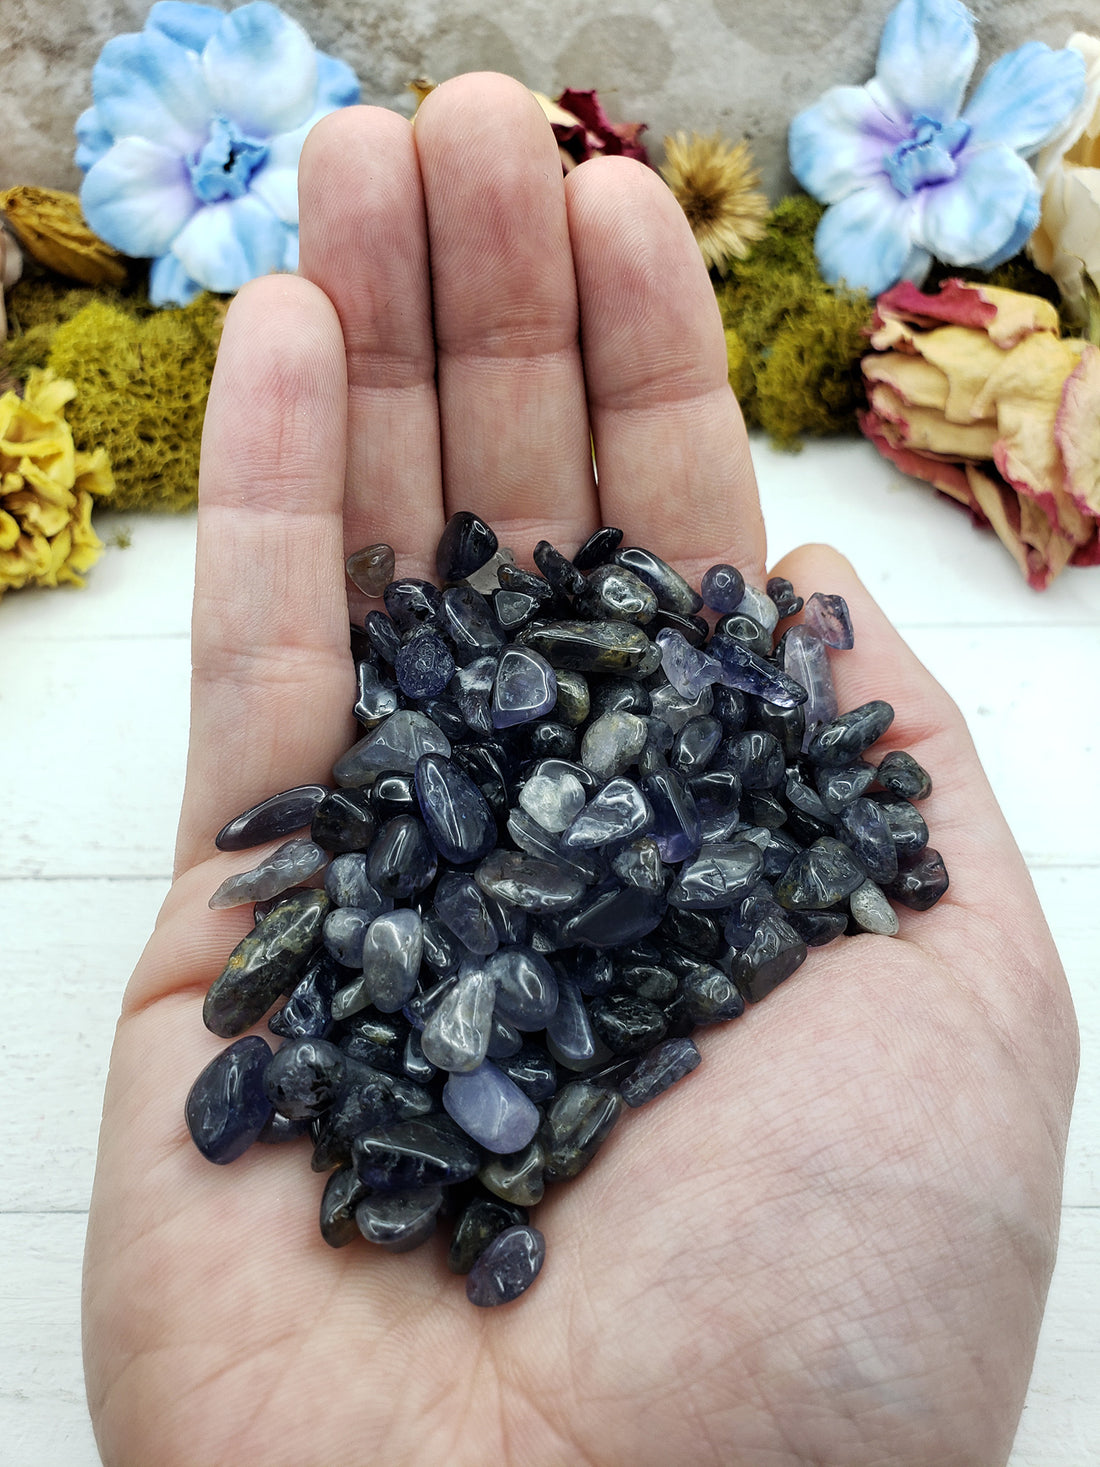 Three ounces of iolite crystal chips in hand